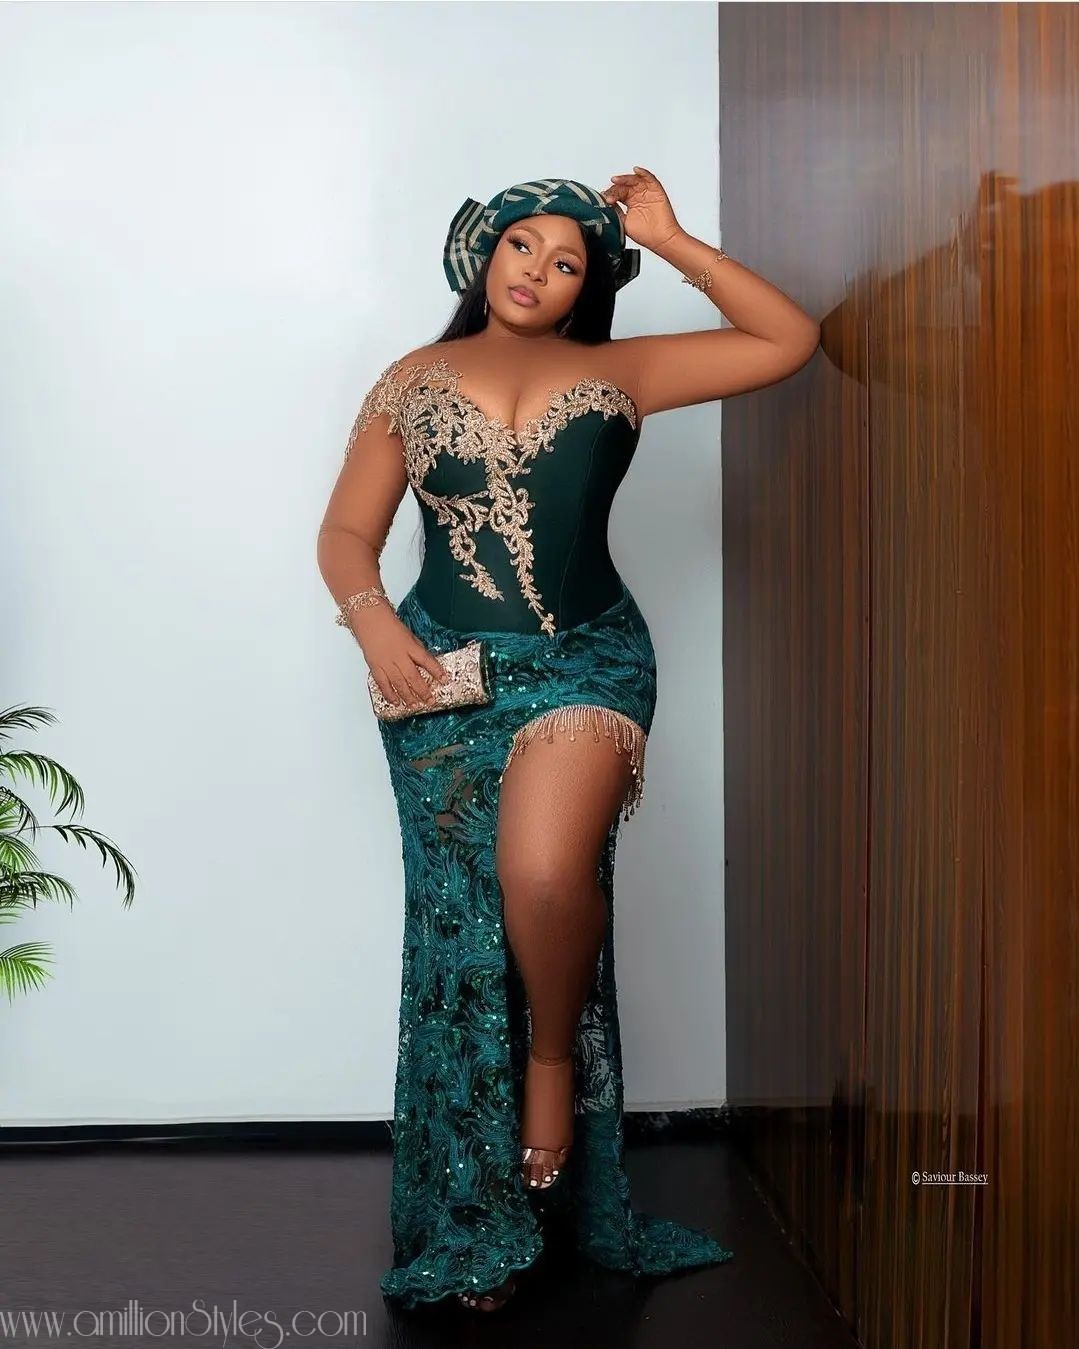 10 Green Lace Asoebi Styles For Owambe